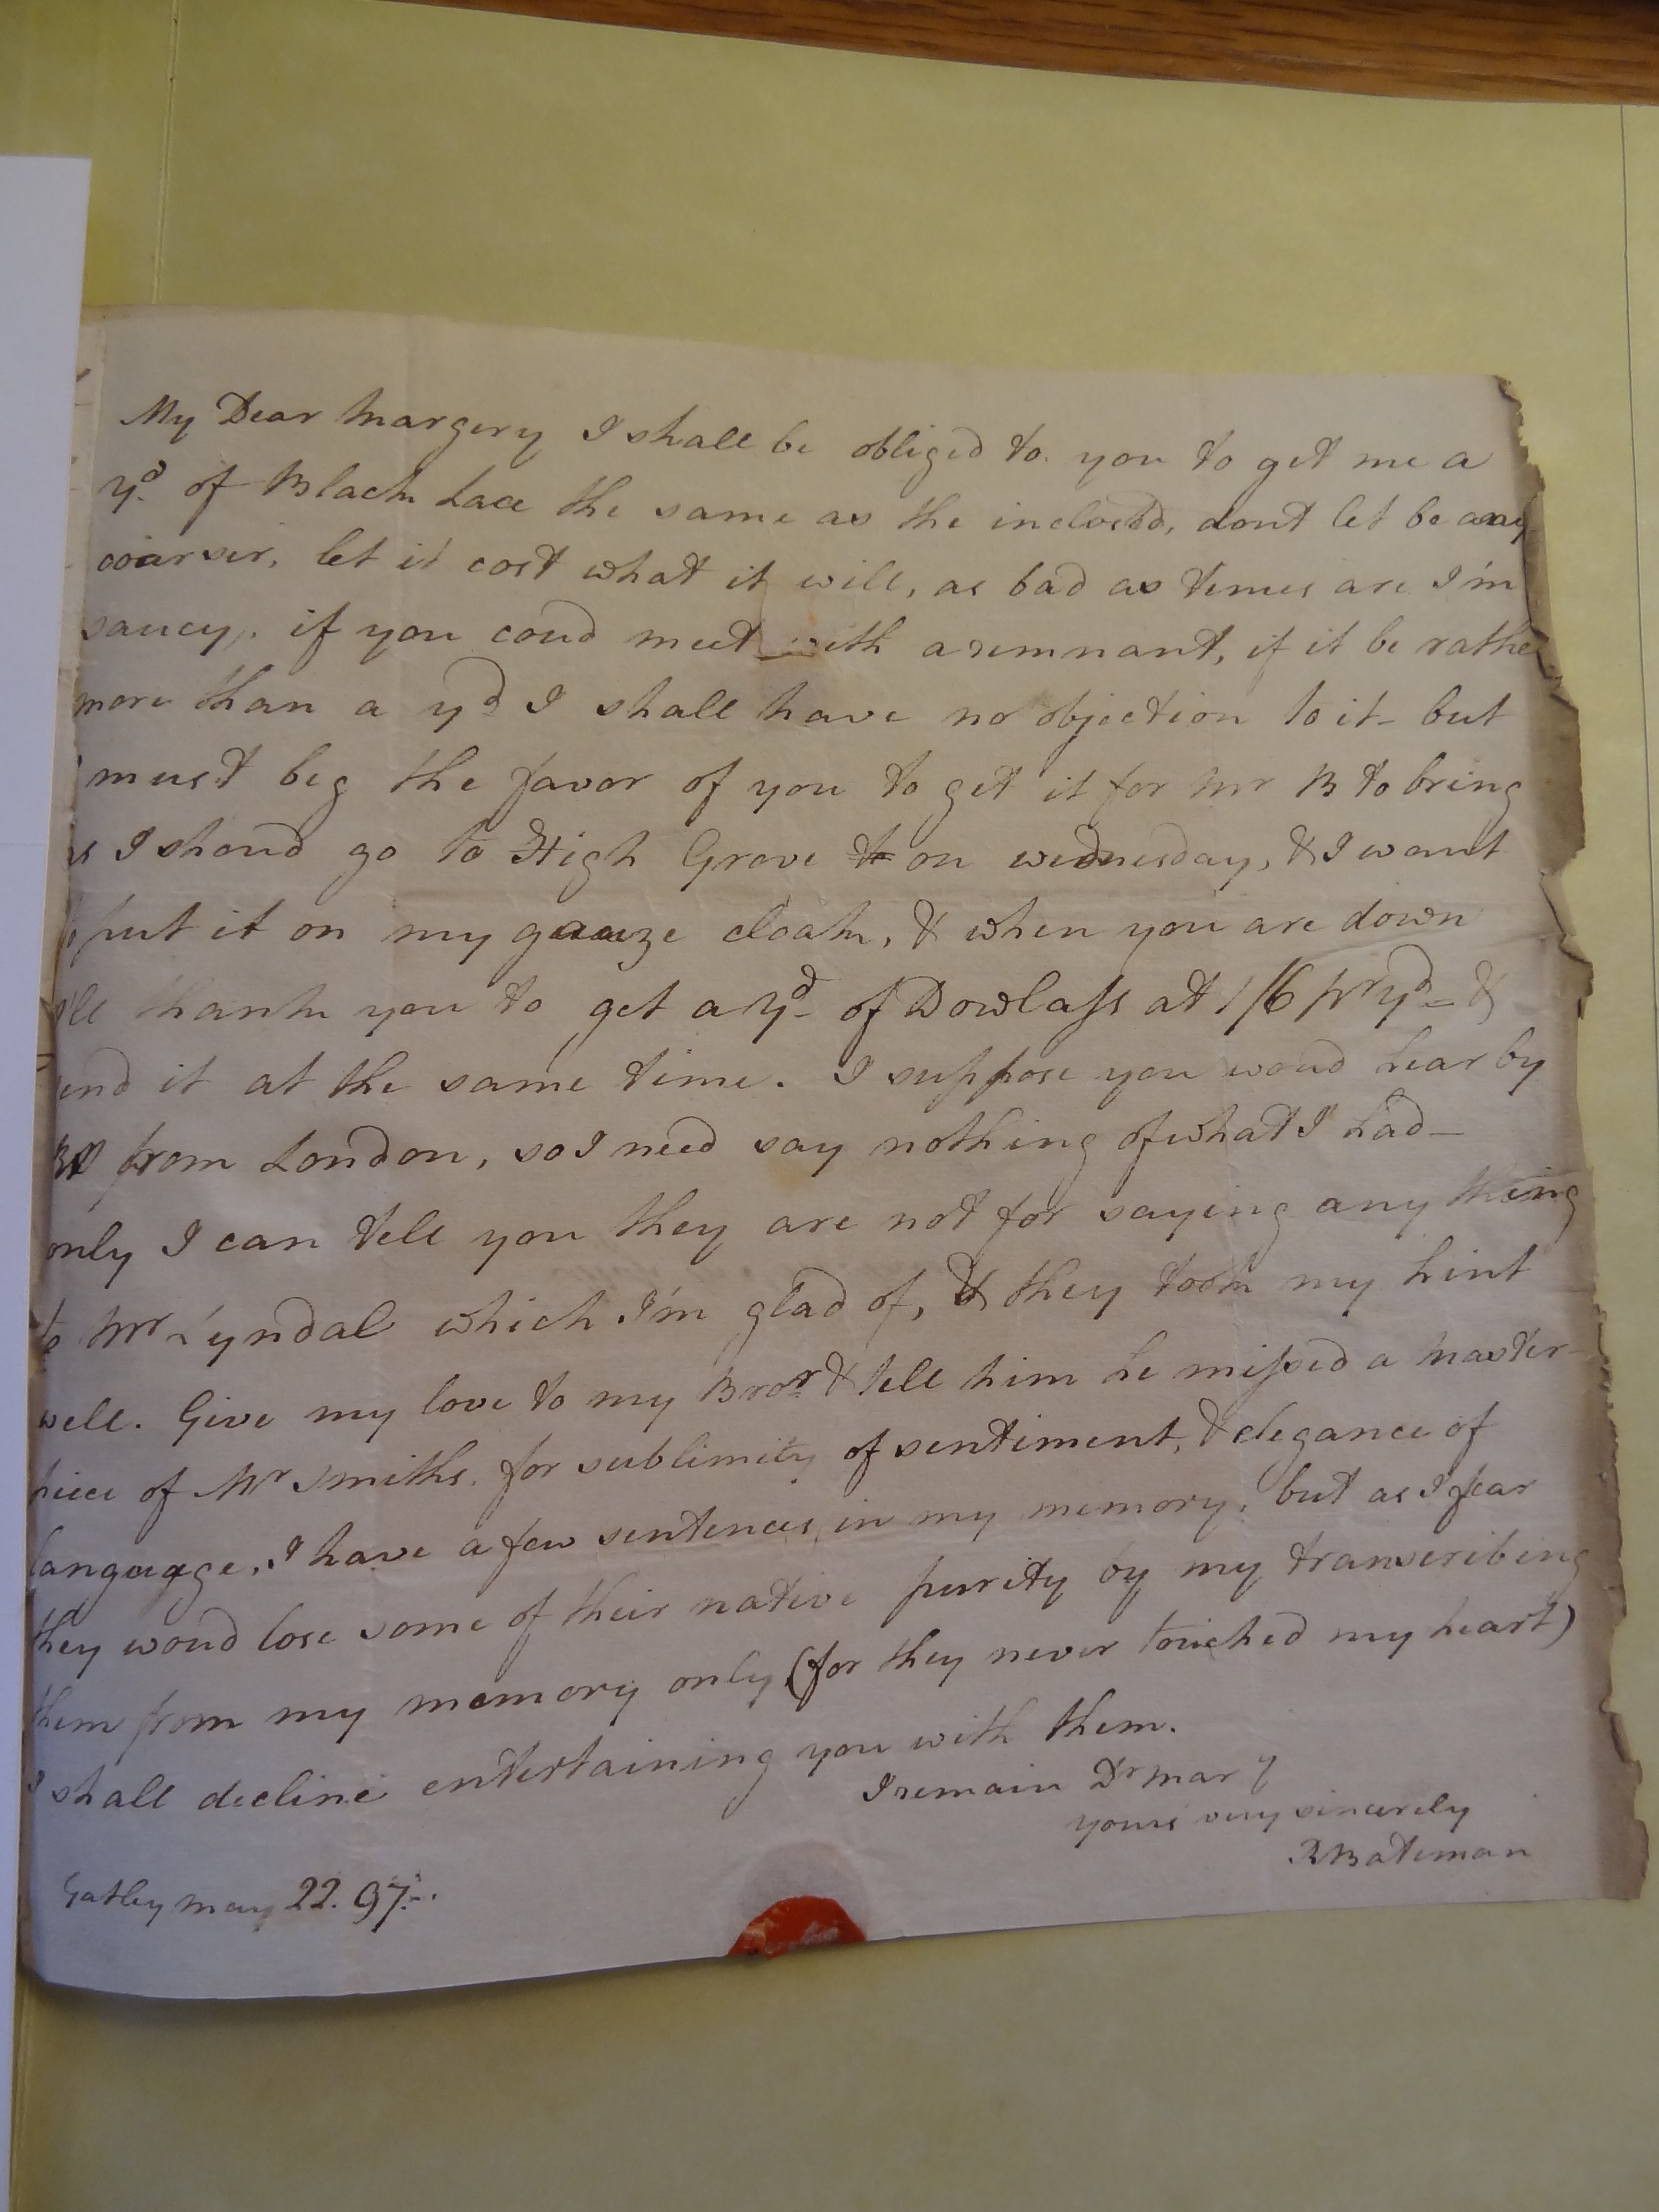 Image #1 of letter: Rebekah Bateman to Margery Smithson, 22 May 1797